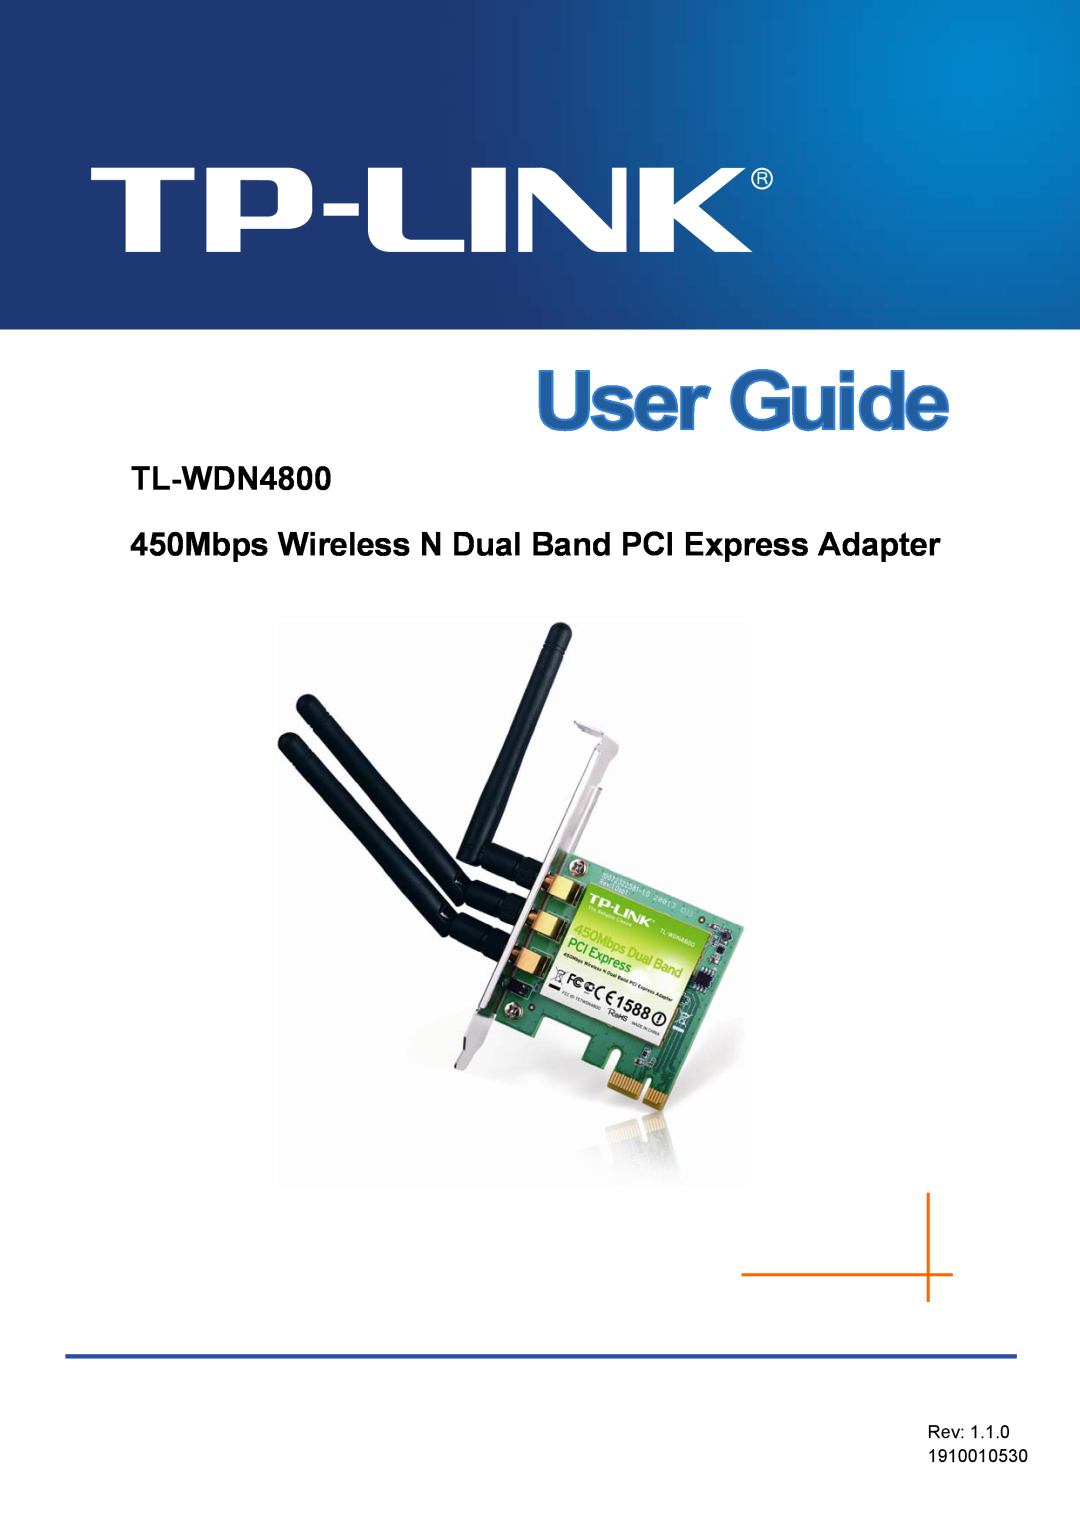 TP-Link TL-WDN4800 manual Hardware Connection, Steps, Package Contents, Software Installation, Quick Installation Guide 